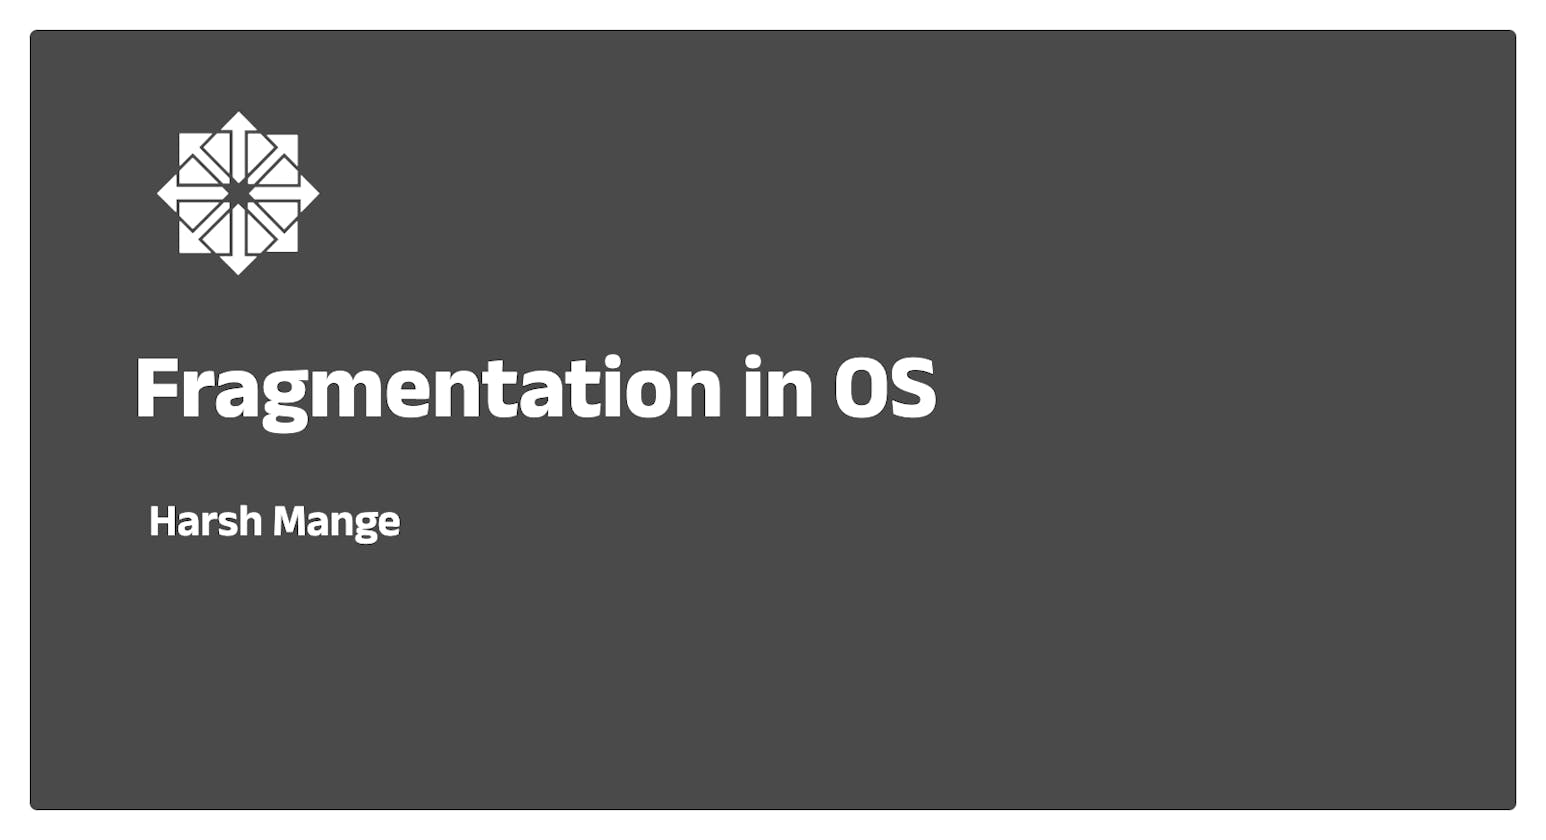 Types of Fragmentation in OS and How to Address Them